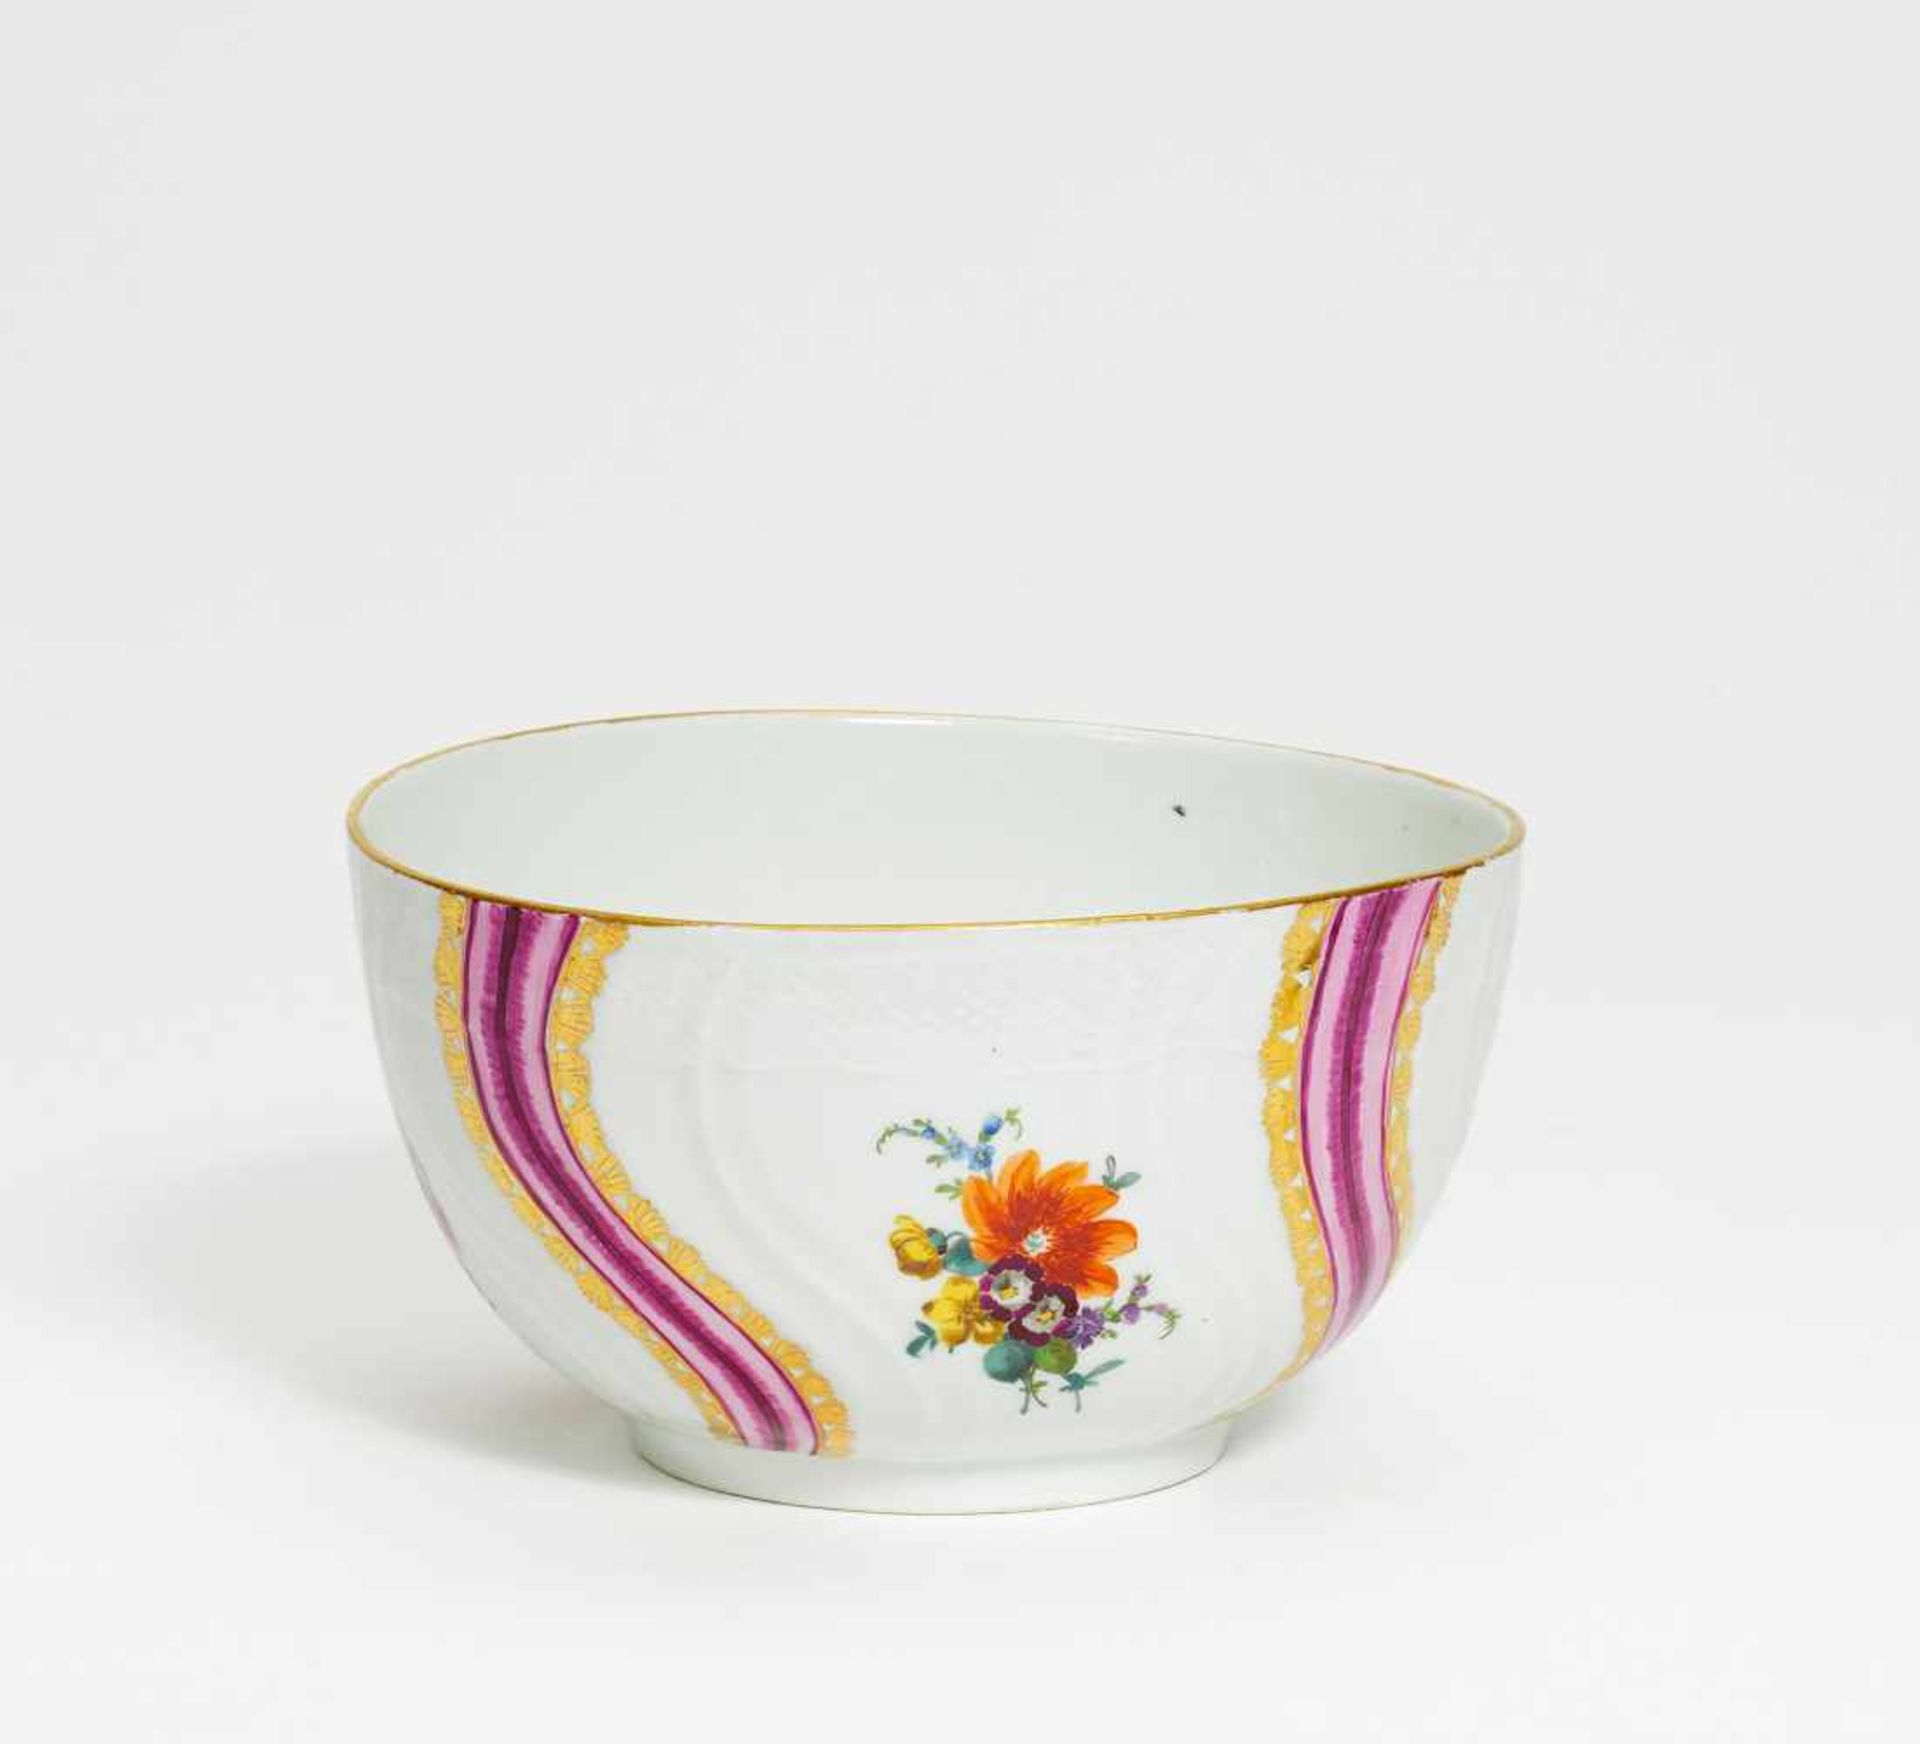 PORCELAIN BOWL WITH FLOWER AND RIBBON DECOR.